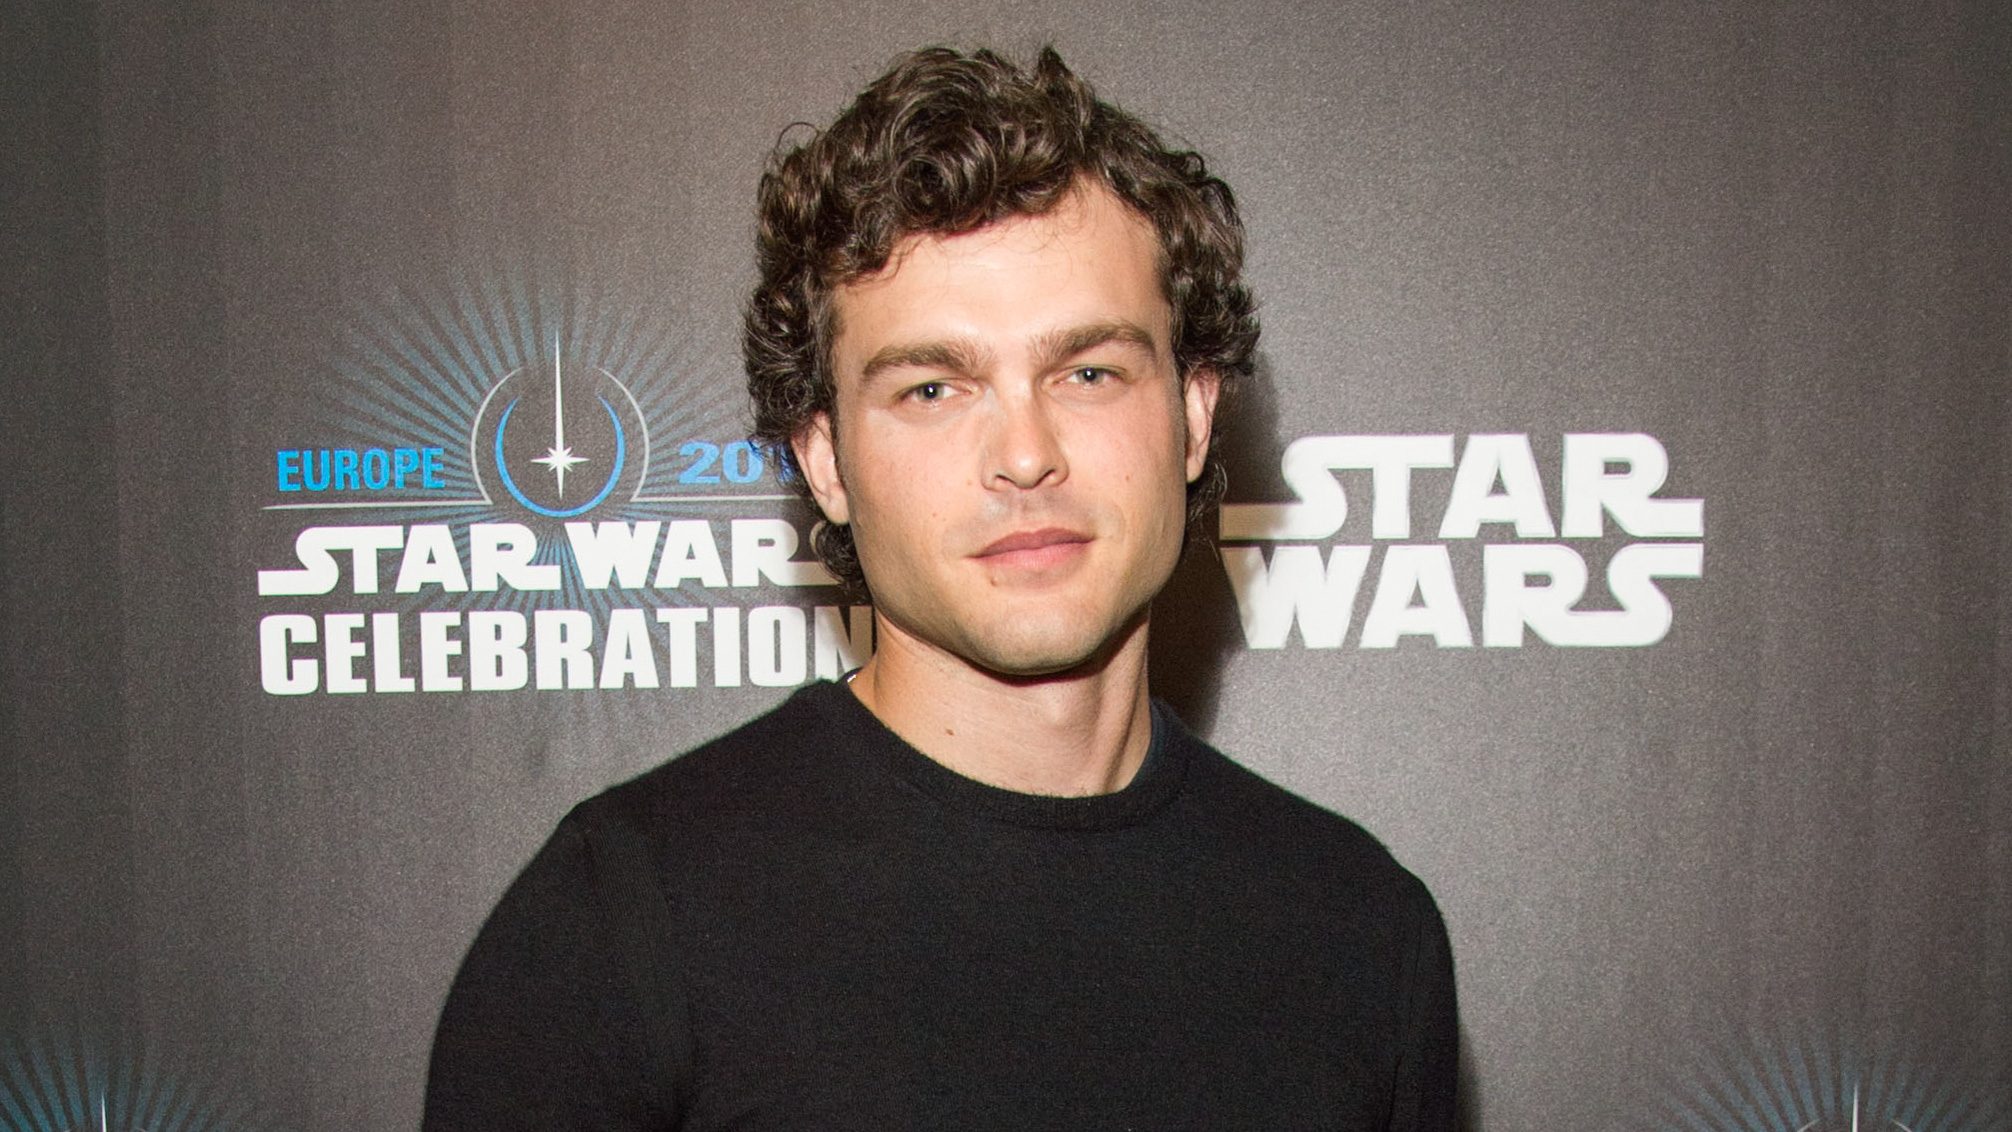 Confirmed: Alden Ehrenreich to play young Han Solo in ‘Star Wars’ spin-off